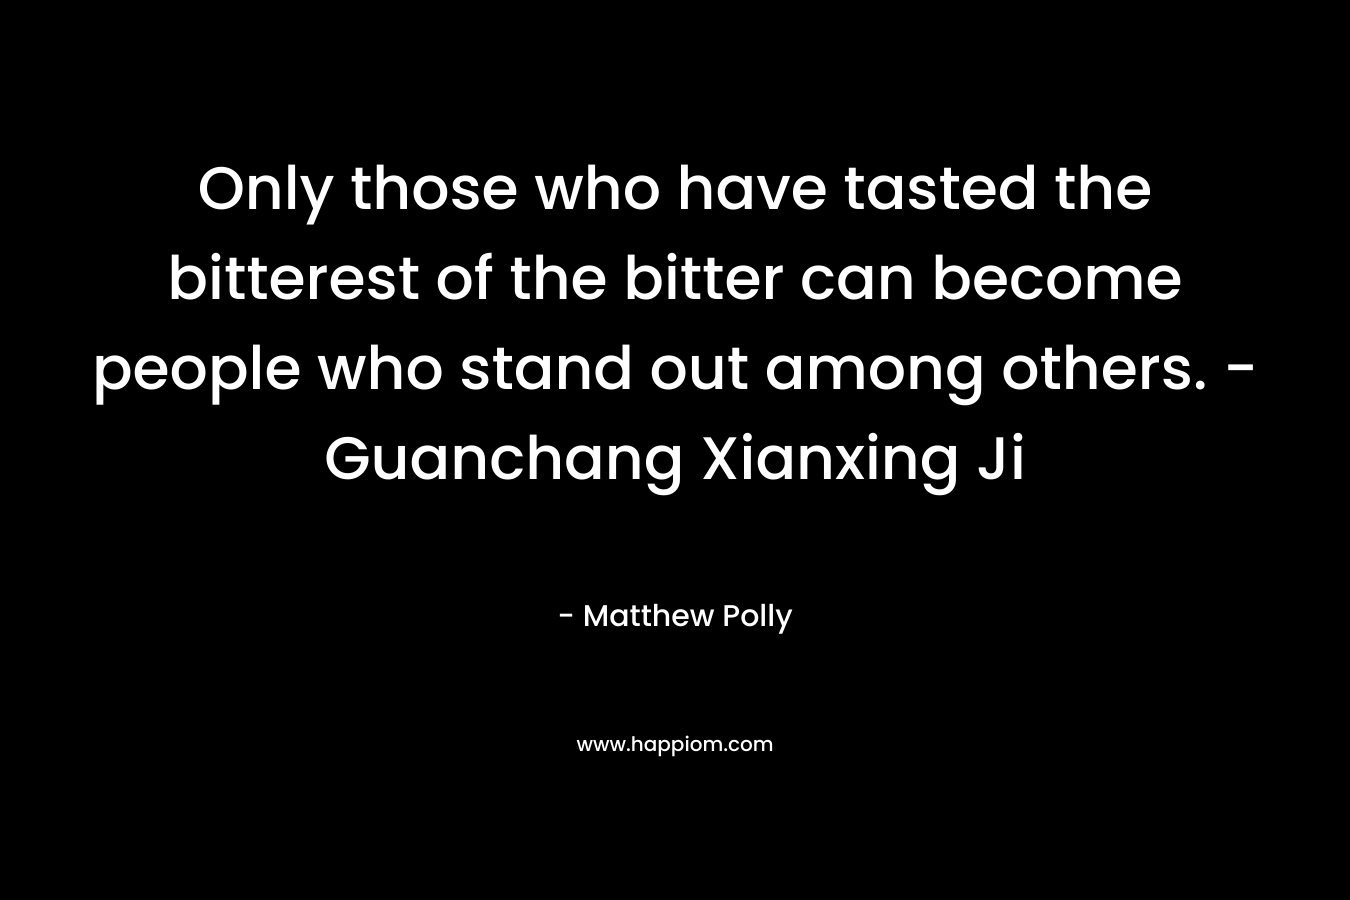 Only those who have tasted the bitterest of the bitter can become people who stand out among others. -Guanchang Xianxing Ji – Matthew Polly